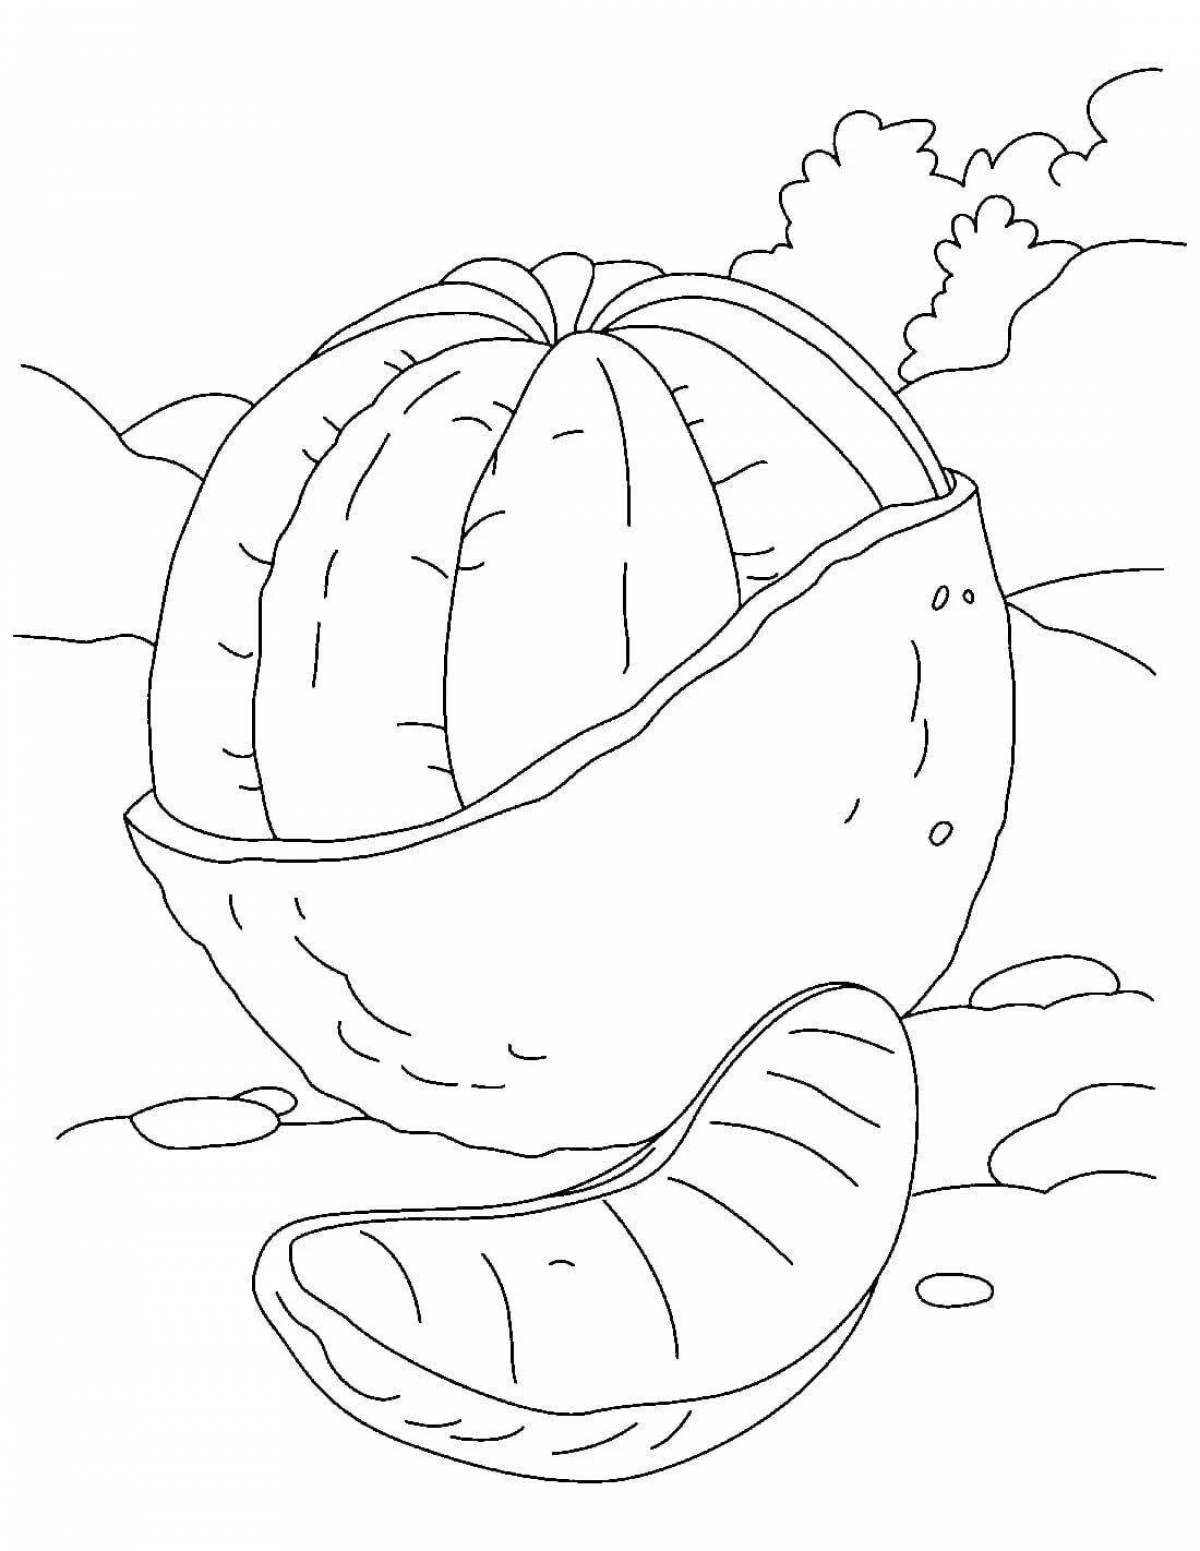 Playful tangerine coloring book for kids